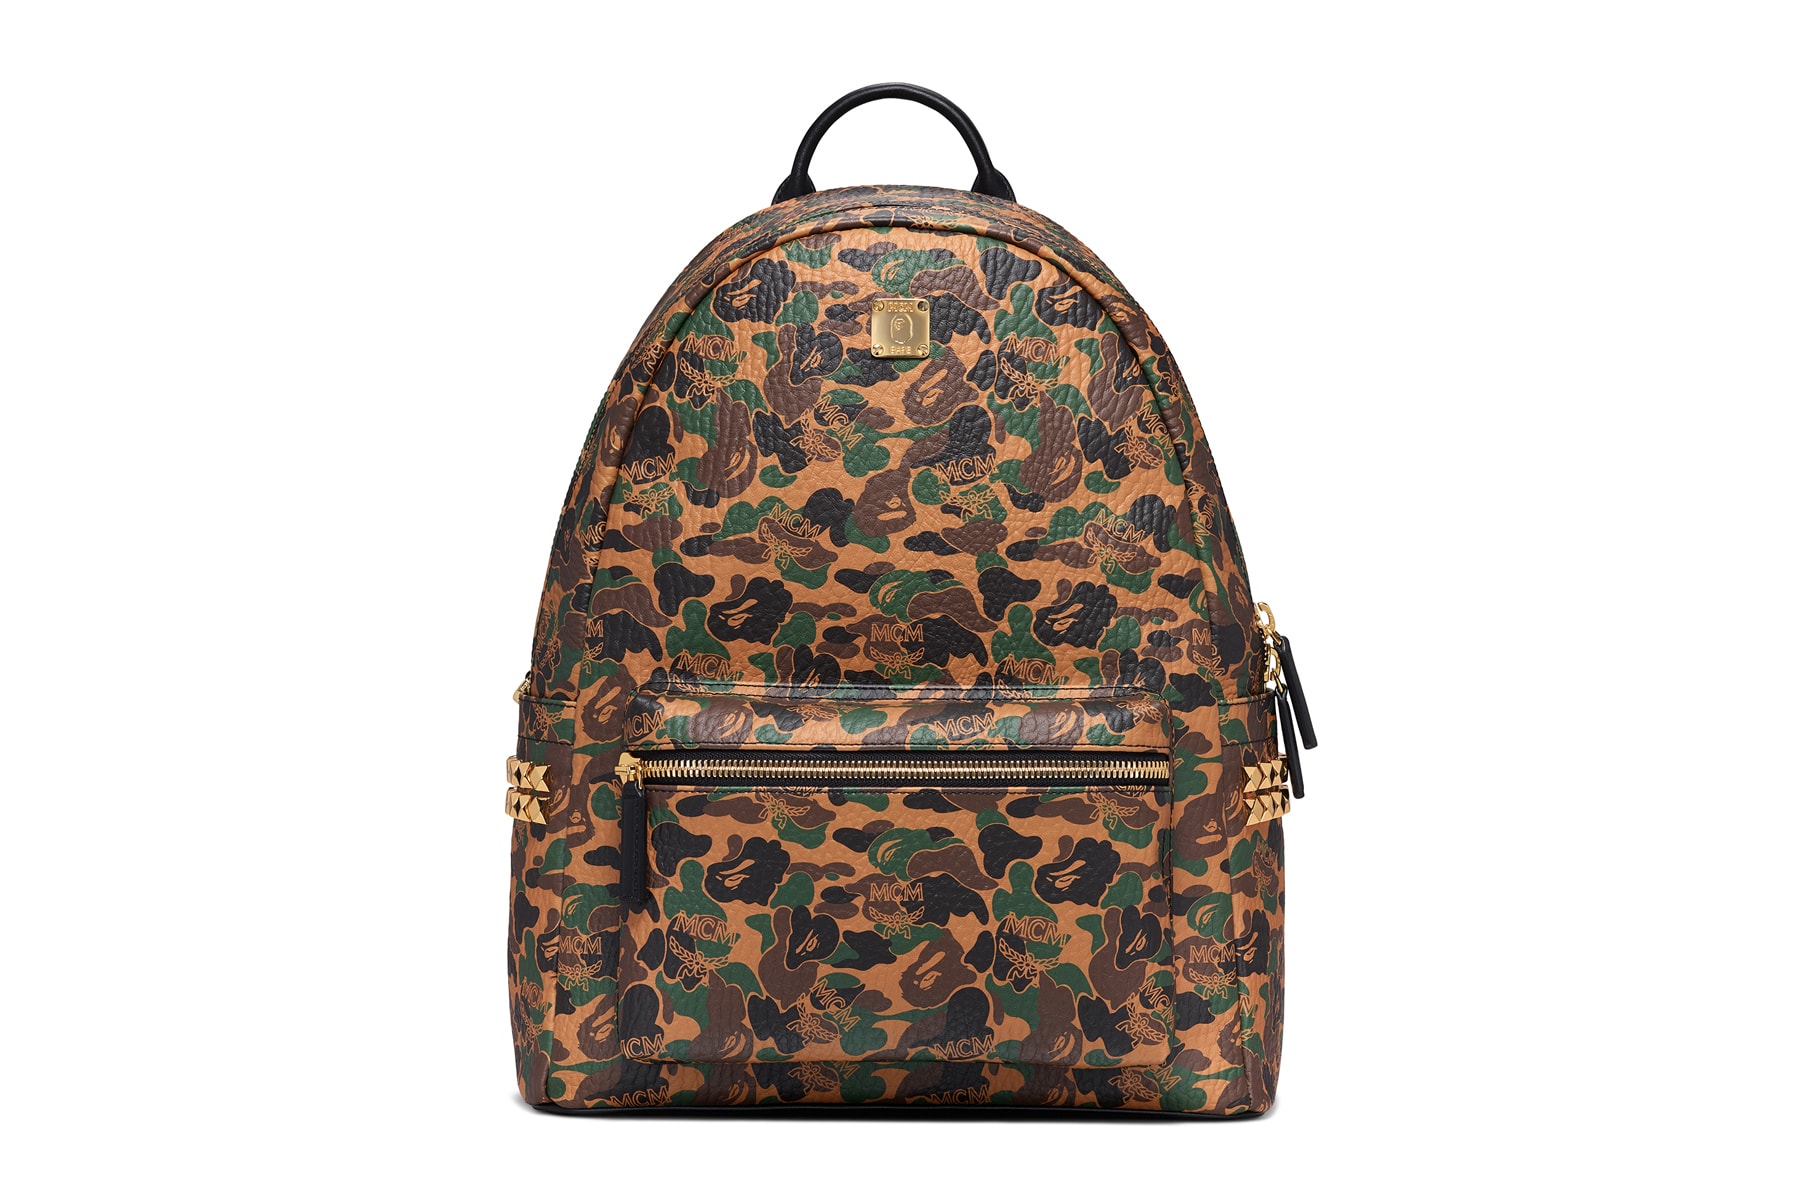 BAPE x MCM Fall Winter 2019 Collection collaborations fall winter lookbook videos ape head camo accessories bags leather goods footwear slides sandals keychains